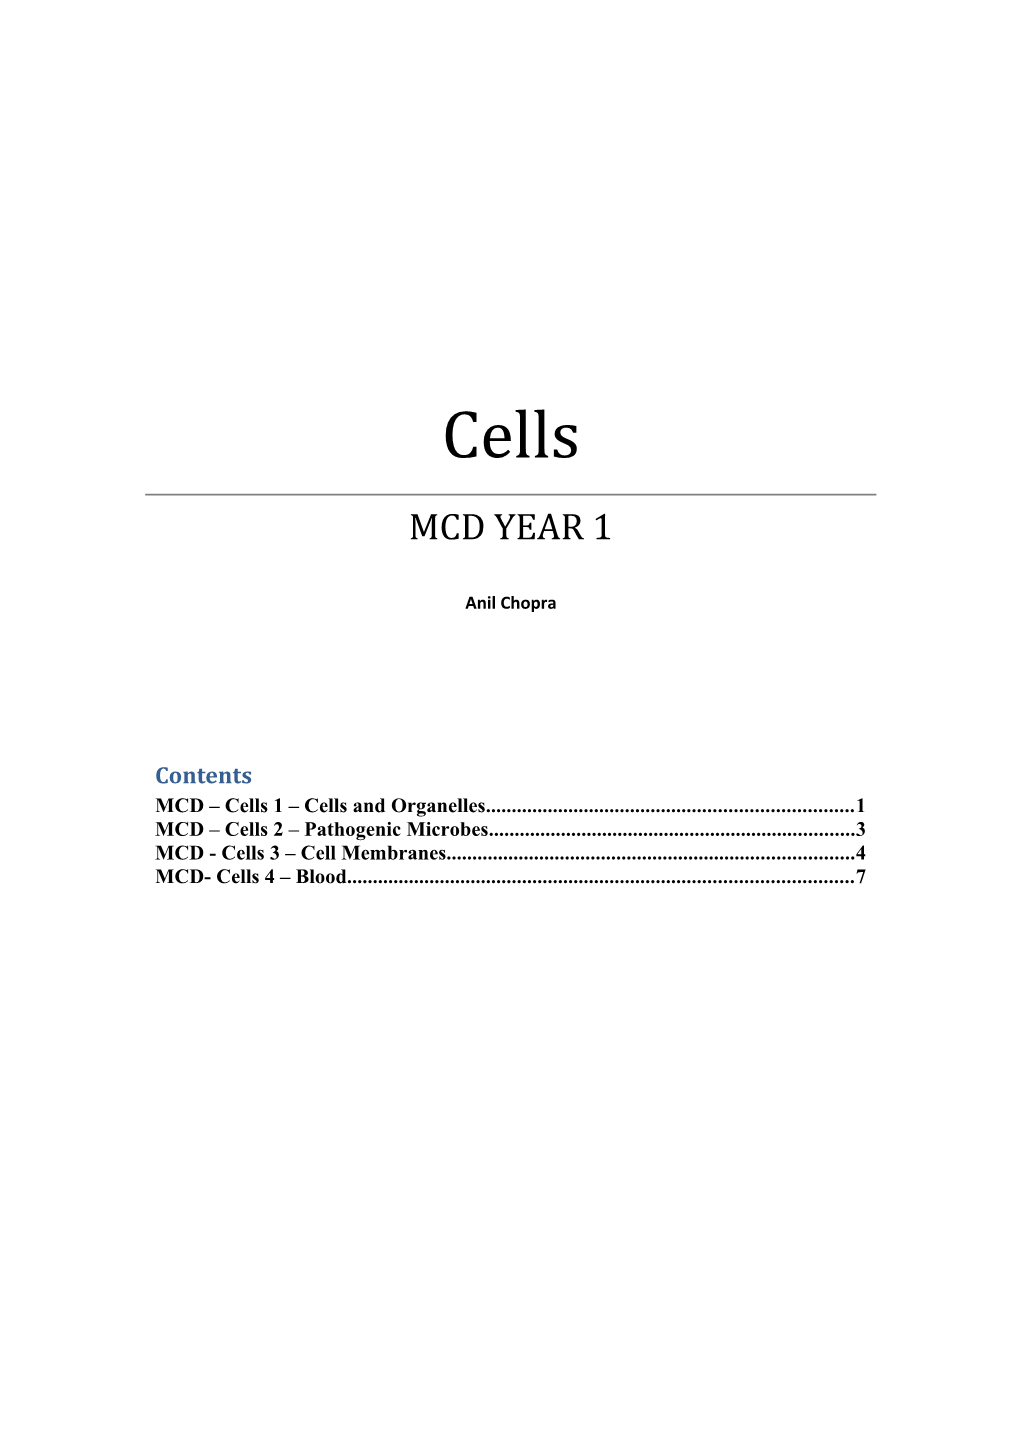 MCD Cells 1 Cells and Organelles 1